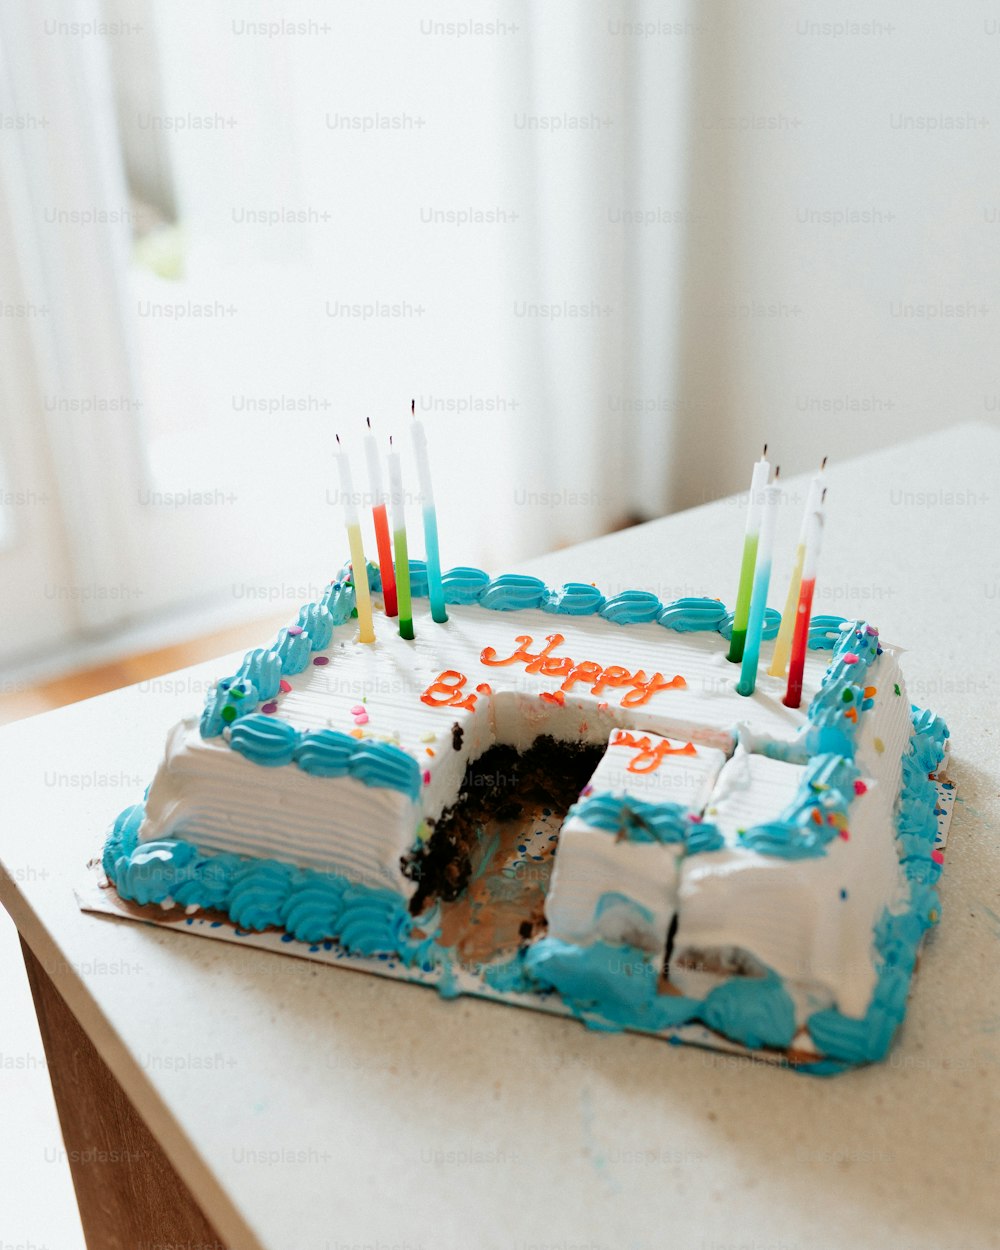 a birthday cake with a hole in the middle